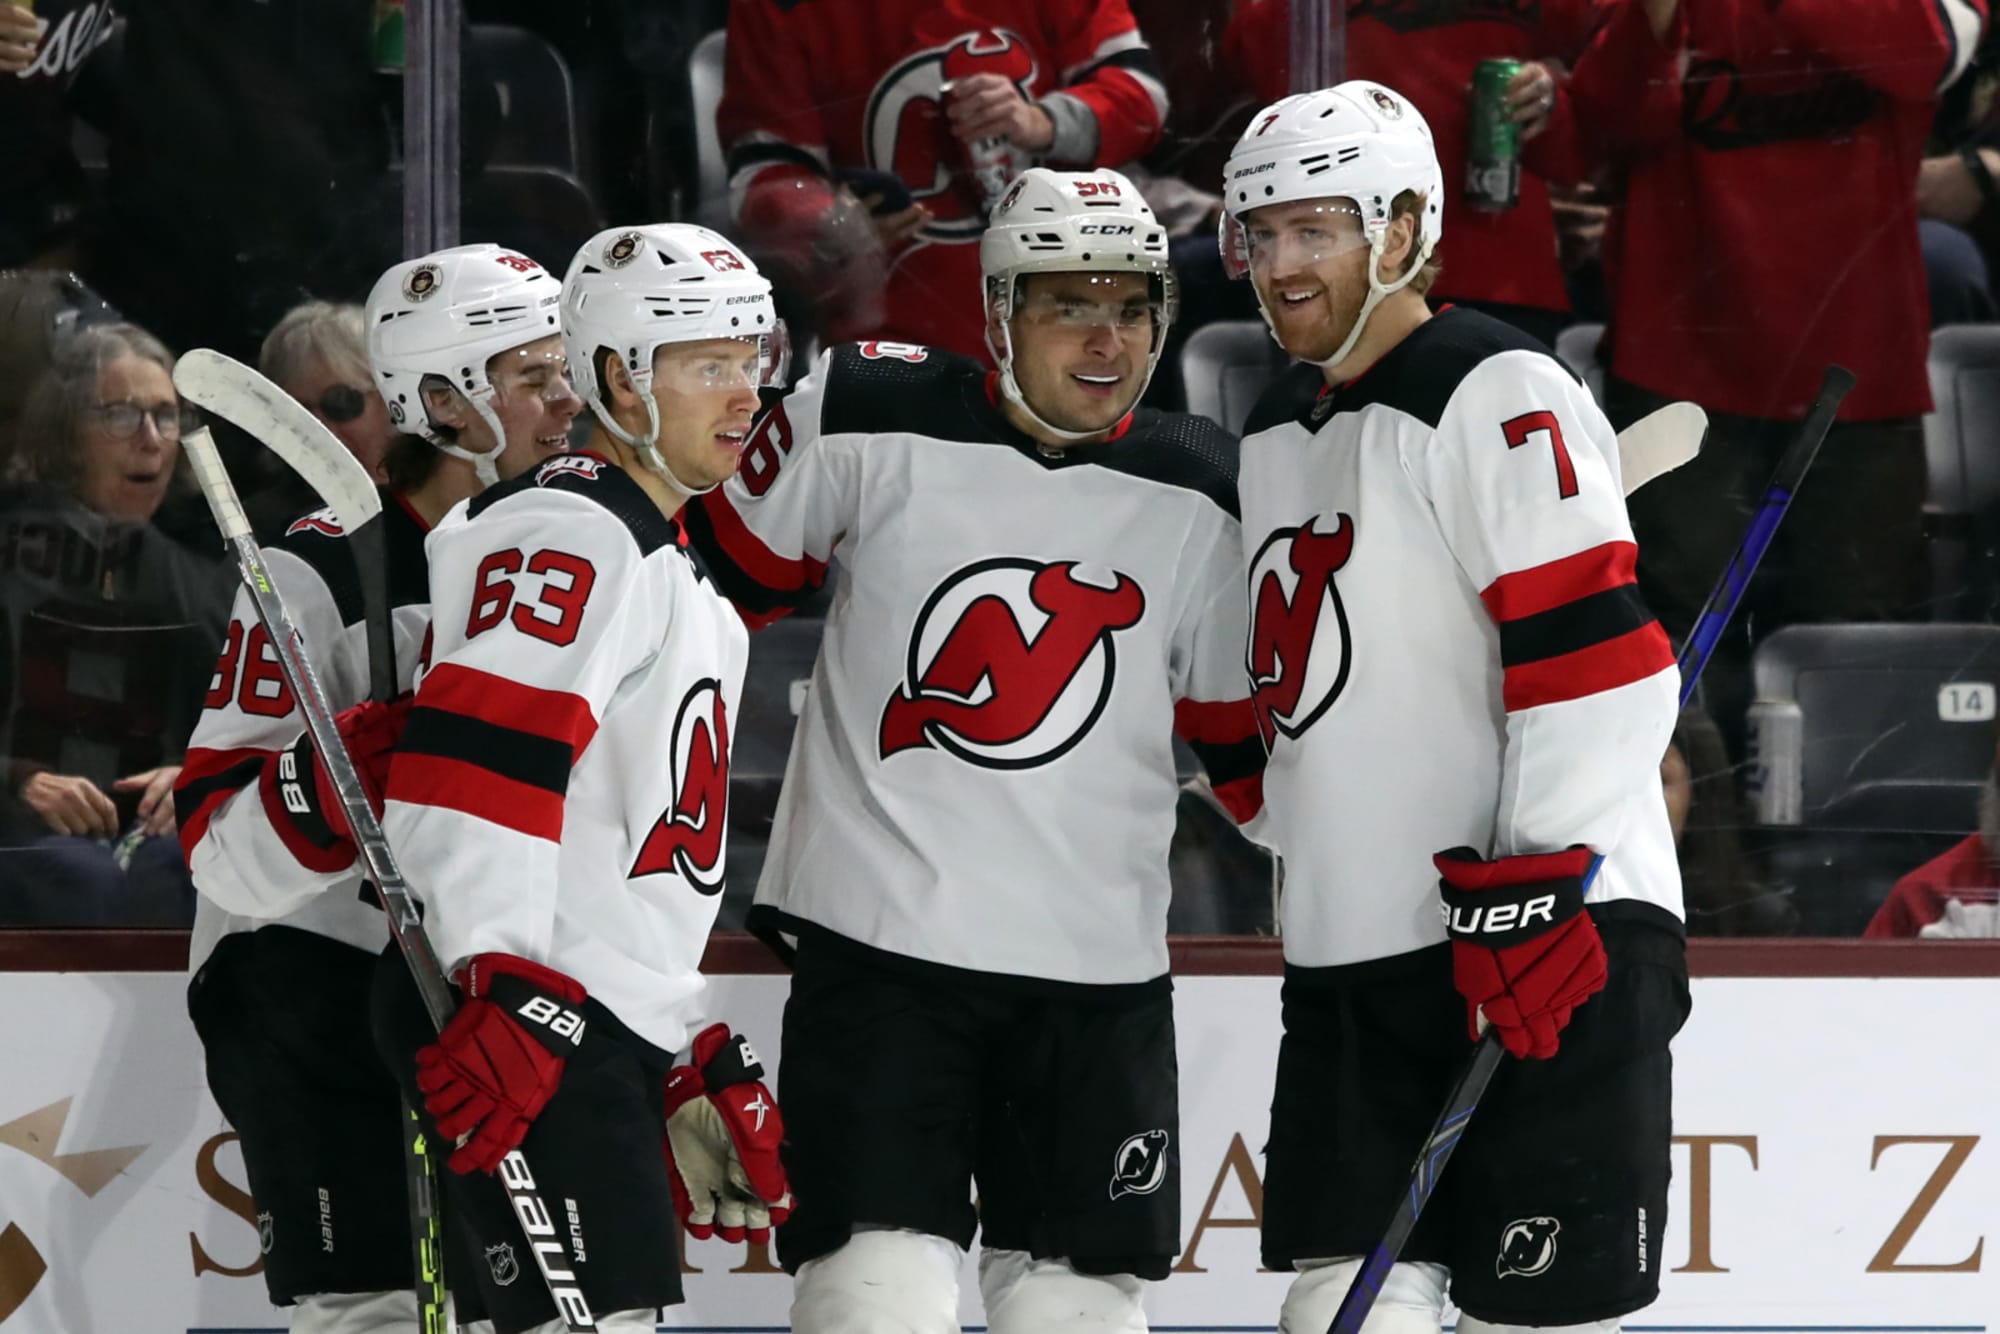 Photos: New Jersey Devils new uniform makes on-ice debut